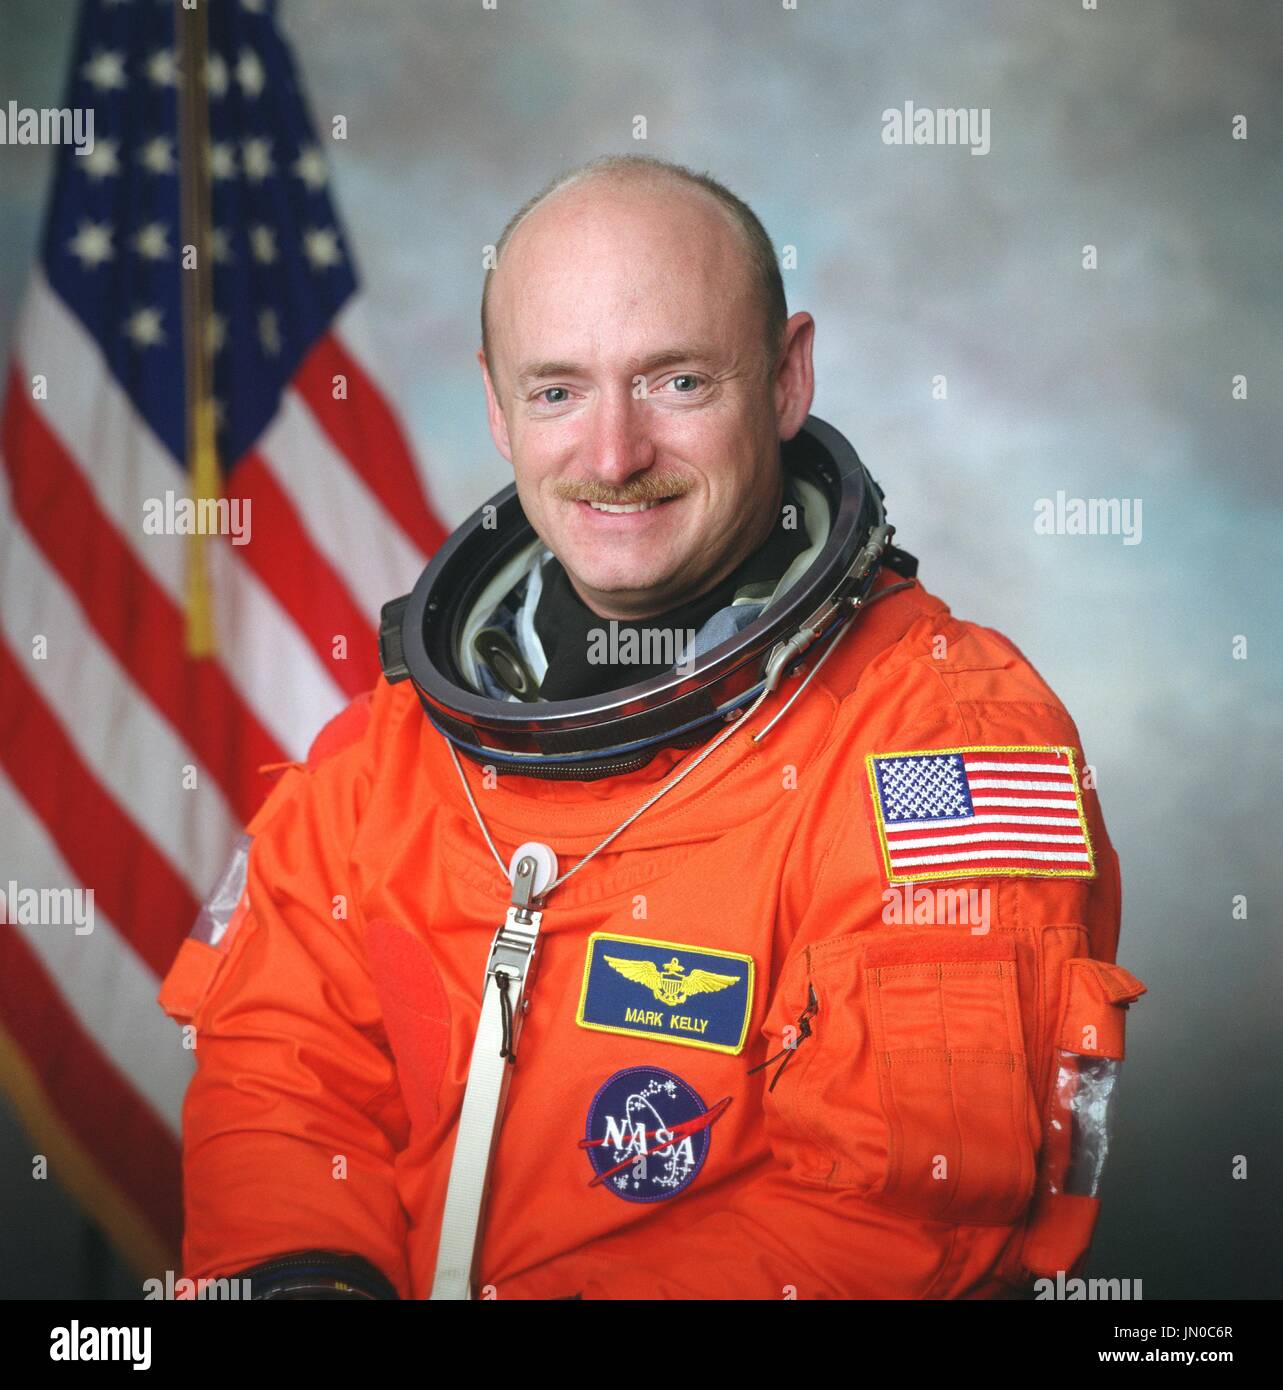 NASA astronaut Mark Kelly, STS-134 commander, and STS-108 pilot official portrait taken in 2001.  Kelly is the husband of United States Representative Gabrielle Giffords (Democrat of Arizona), who was shot in Arizona on Saturday, January 8, 2011..Credit: NASA via CNP Stock Photo